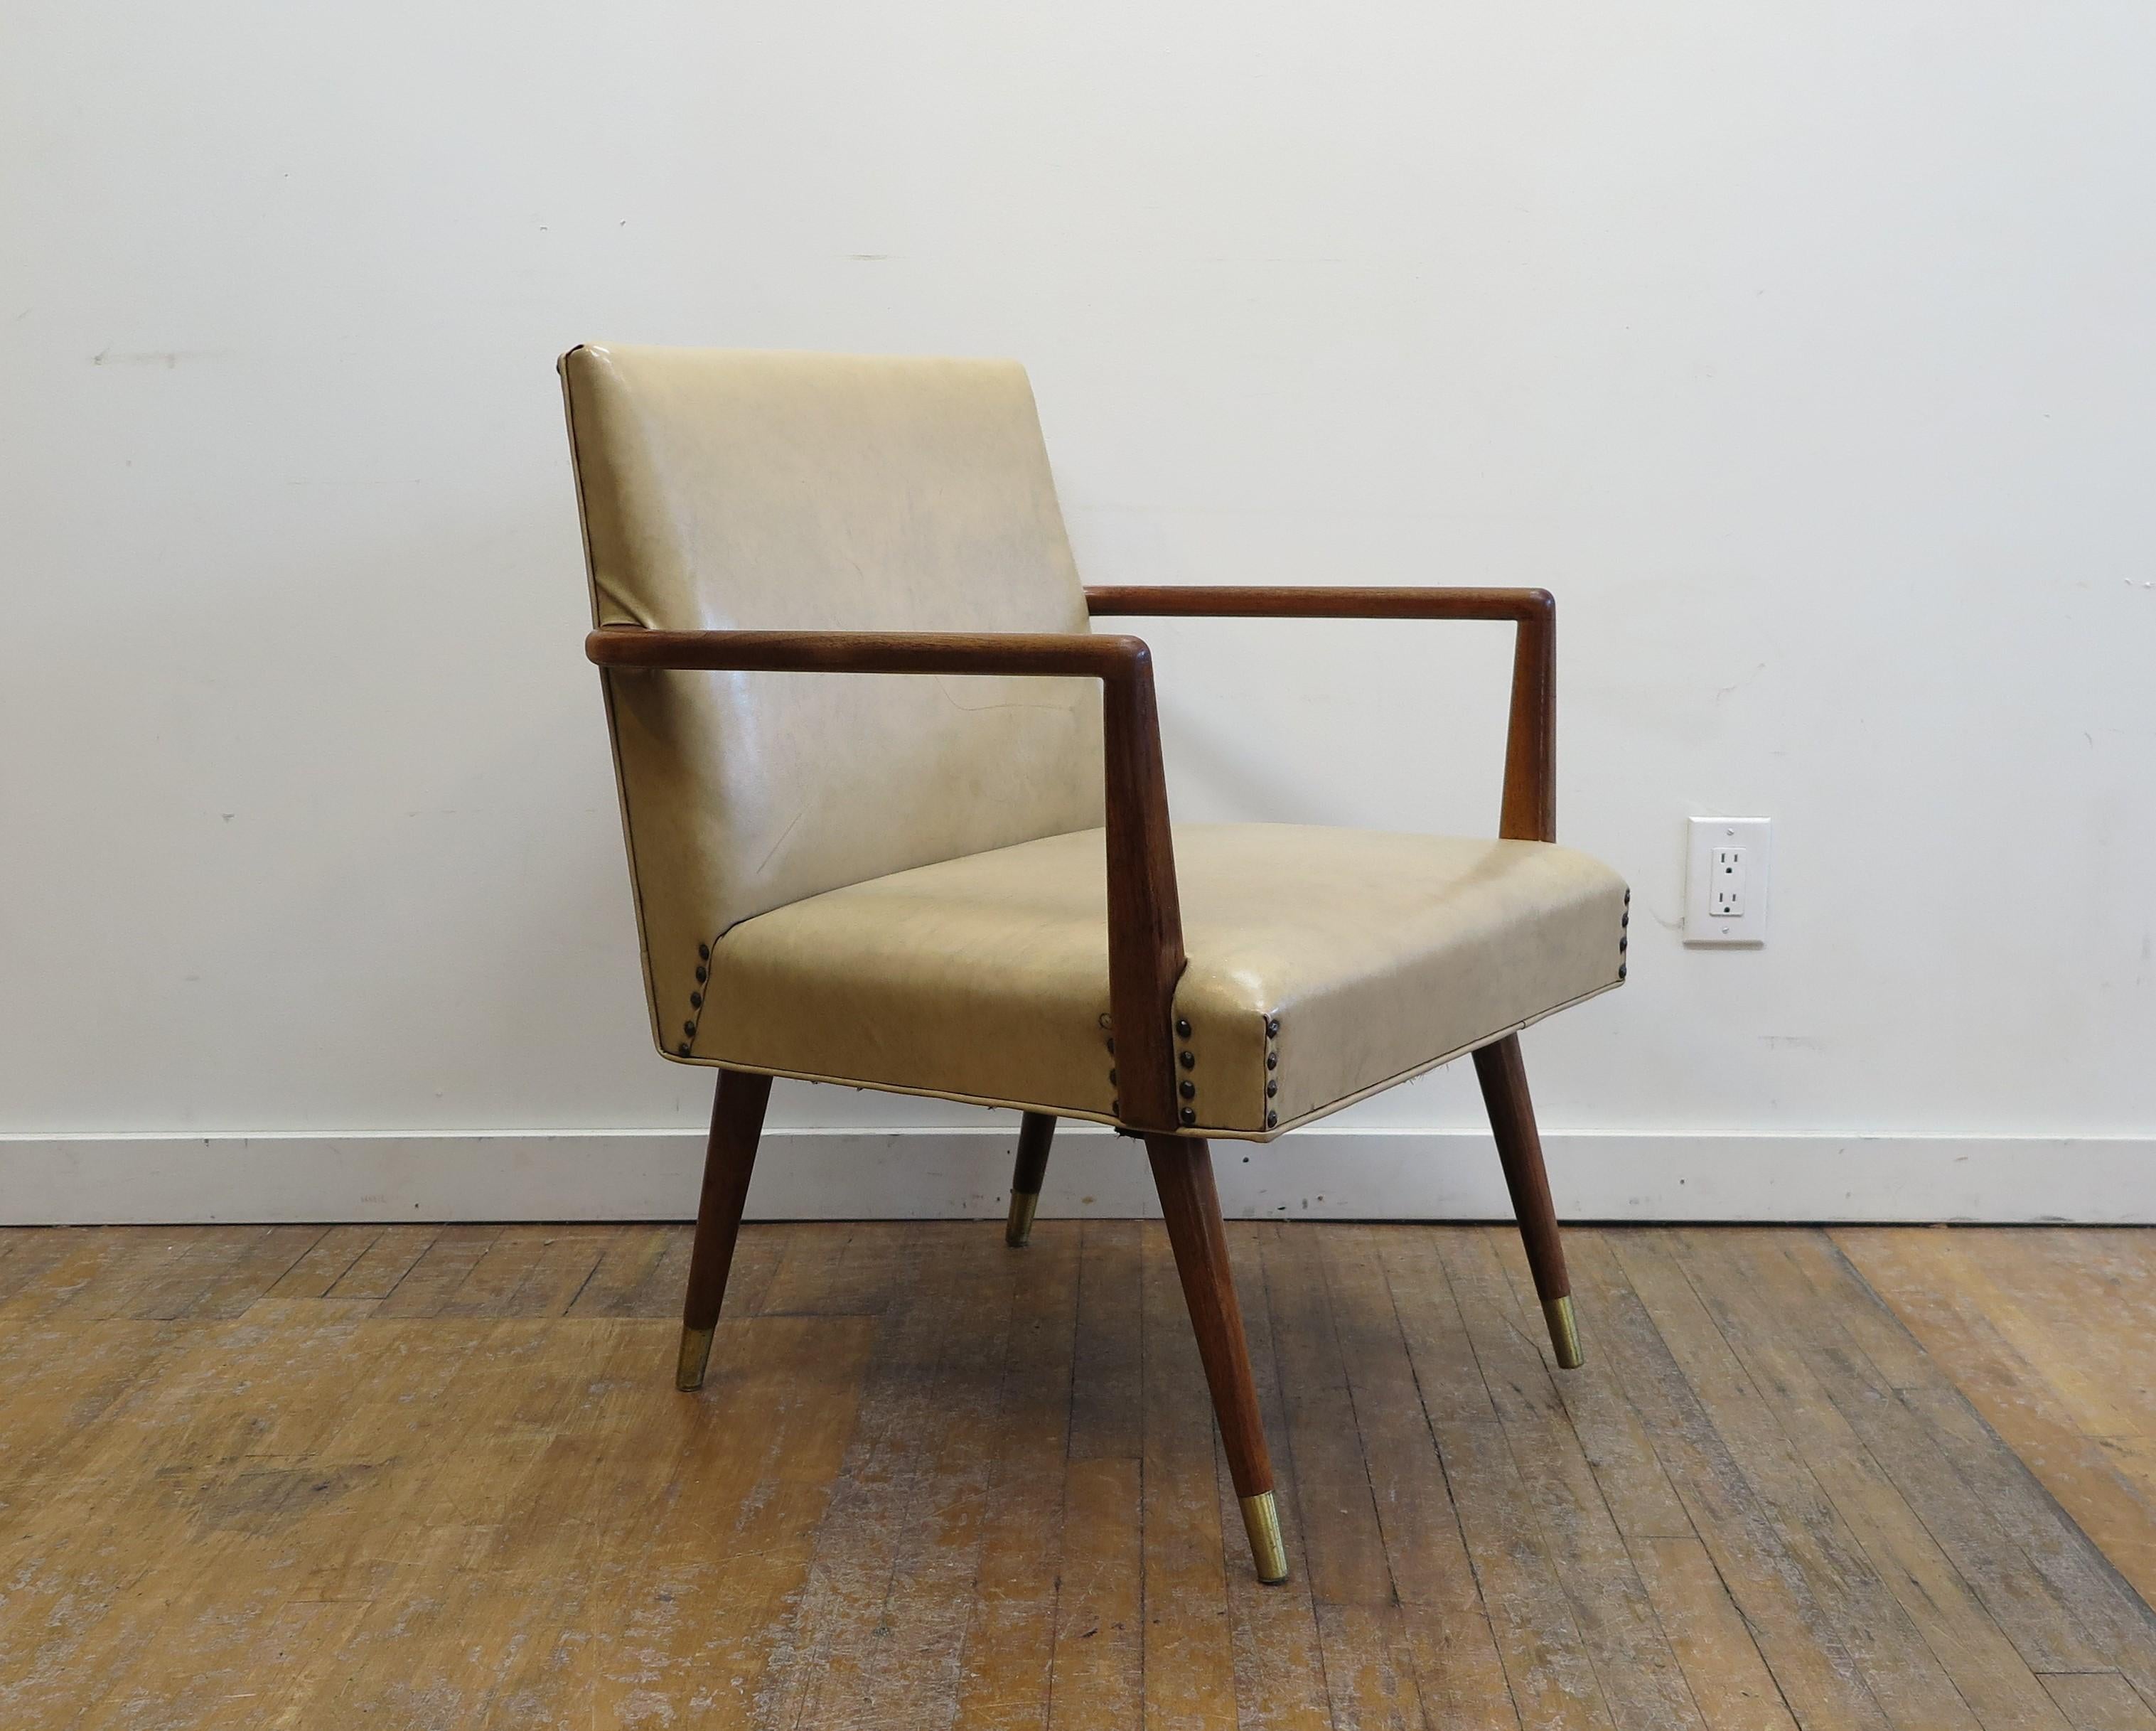 Mid-Century Modern lounge chair. Modernist wooden armed lounge chair in the style of T.H. Robsjohn Gibbings. Walnut frame with Naugahyde covering detailed with nail heads studs and brass sabot feet. Comfortable in good condition all original. Early